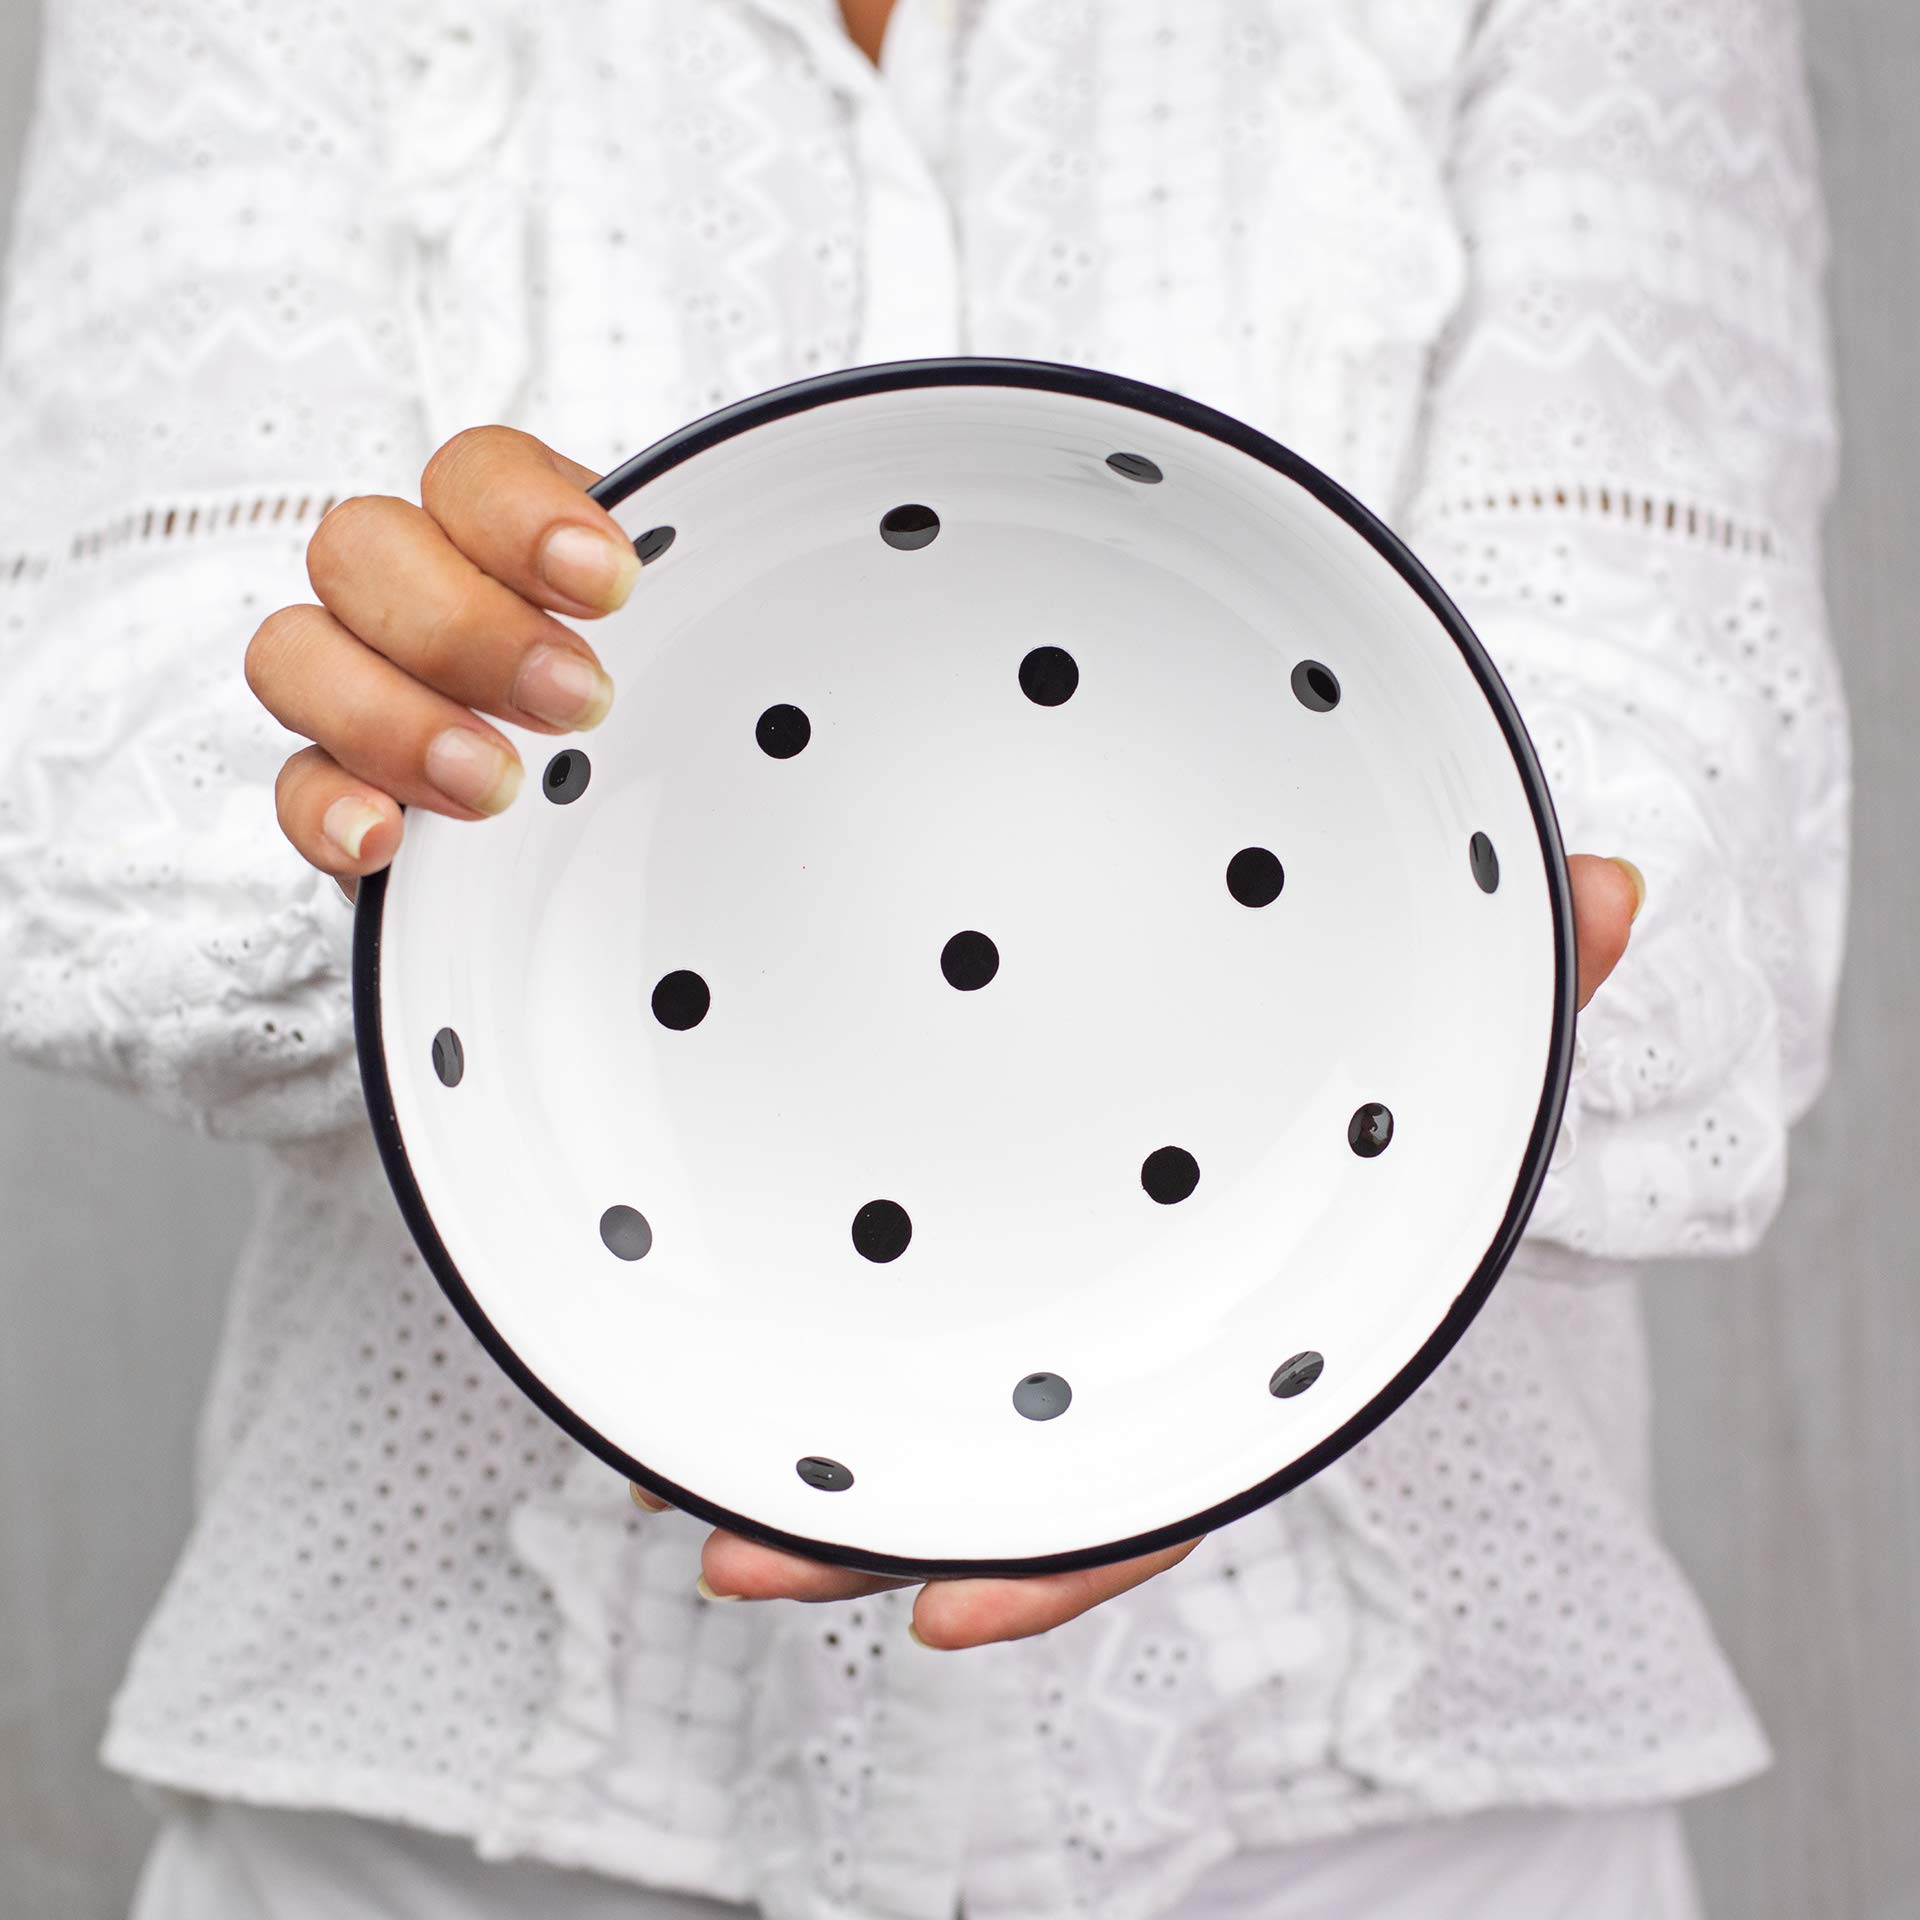 Handmade White And Black Pottery Polka Dot Glazed 7.3inch/18.5cm, 14oz/400ml Salad, Pasta, Fruit, Cereal, Soup Bowl | Unique Ceramic Dinnerware, Housewarming Gift by City to Cottage®